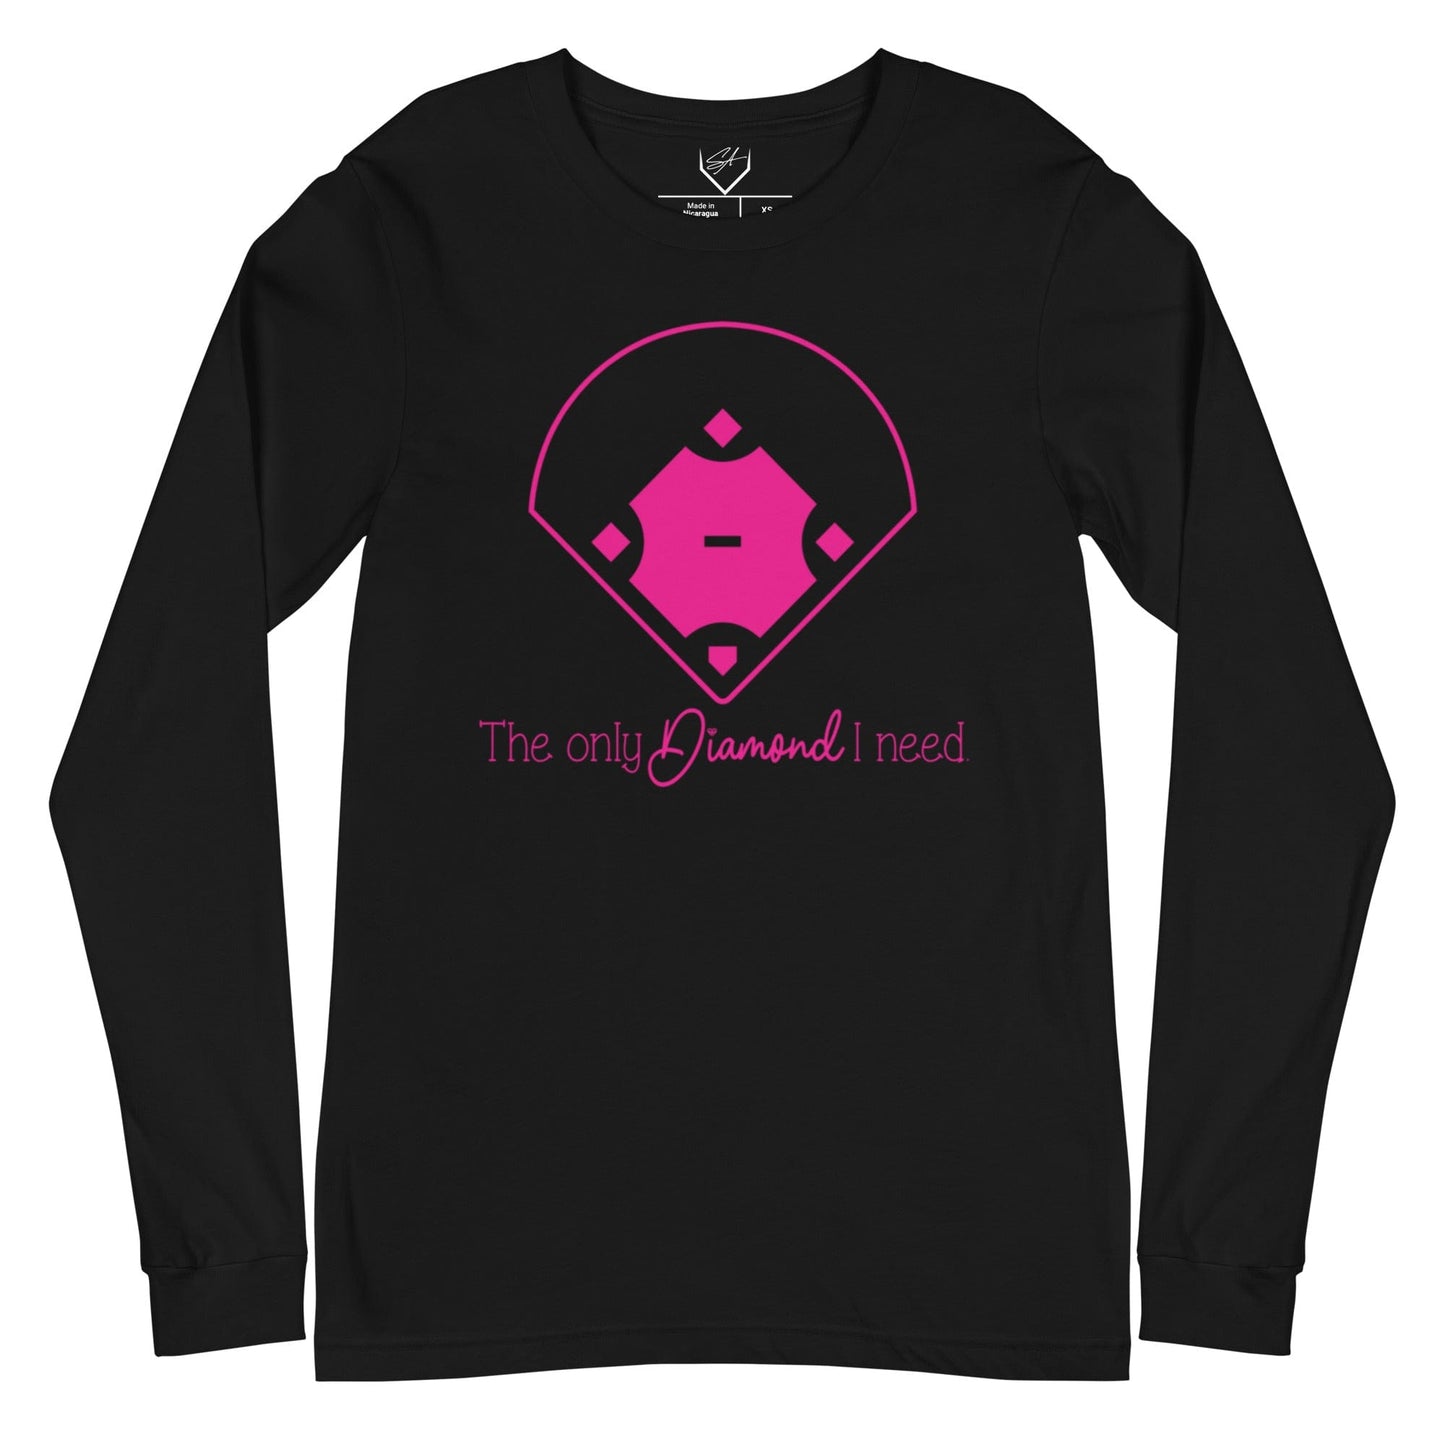 The Only Diamond I Need - Adult Long Sleeve